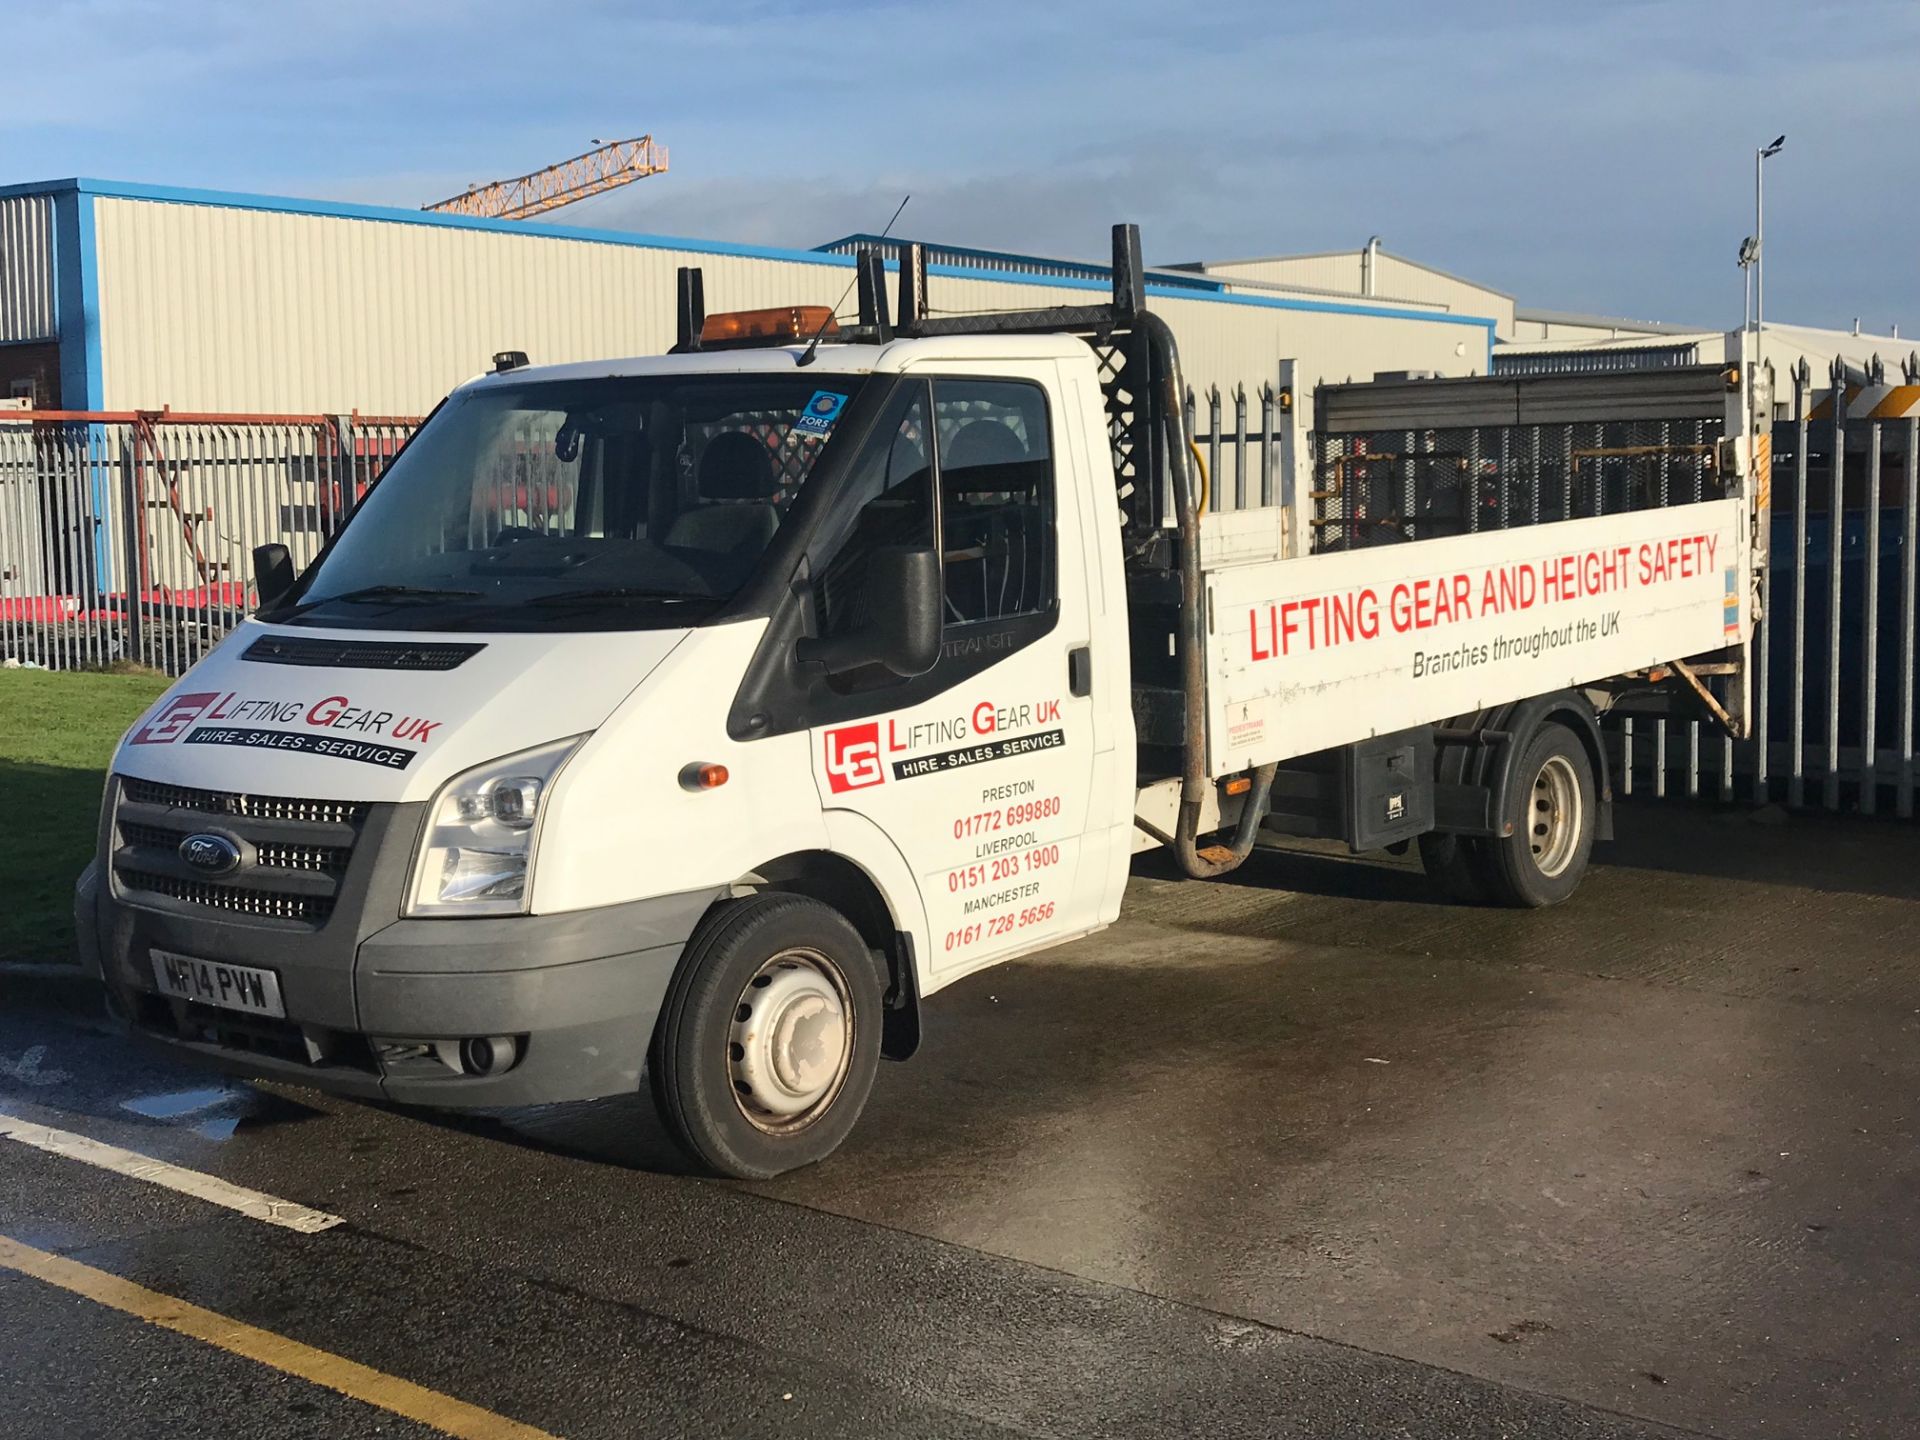 WITHDRAWN LOT 2014 / 14 Ford Transit Twin Wheel Dropside with Taillift - 167993 - miles April 2019